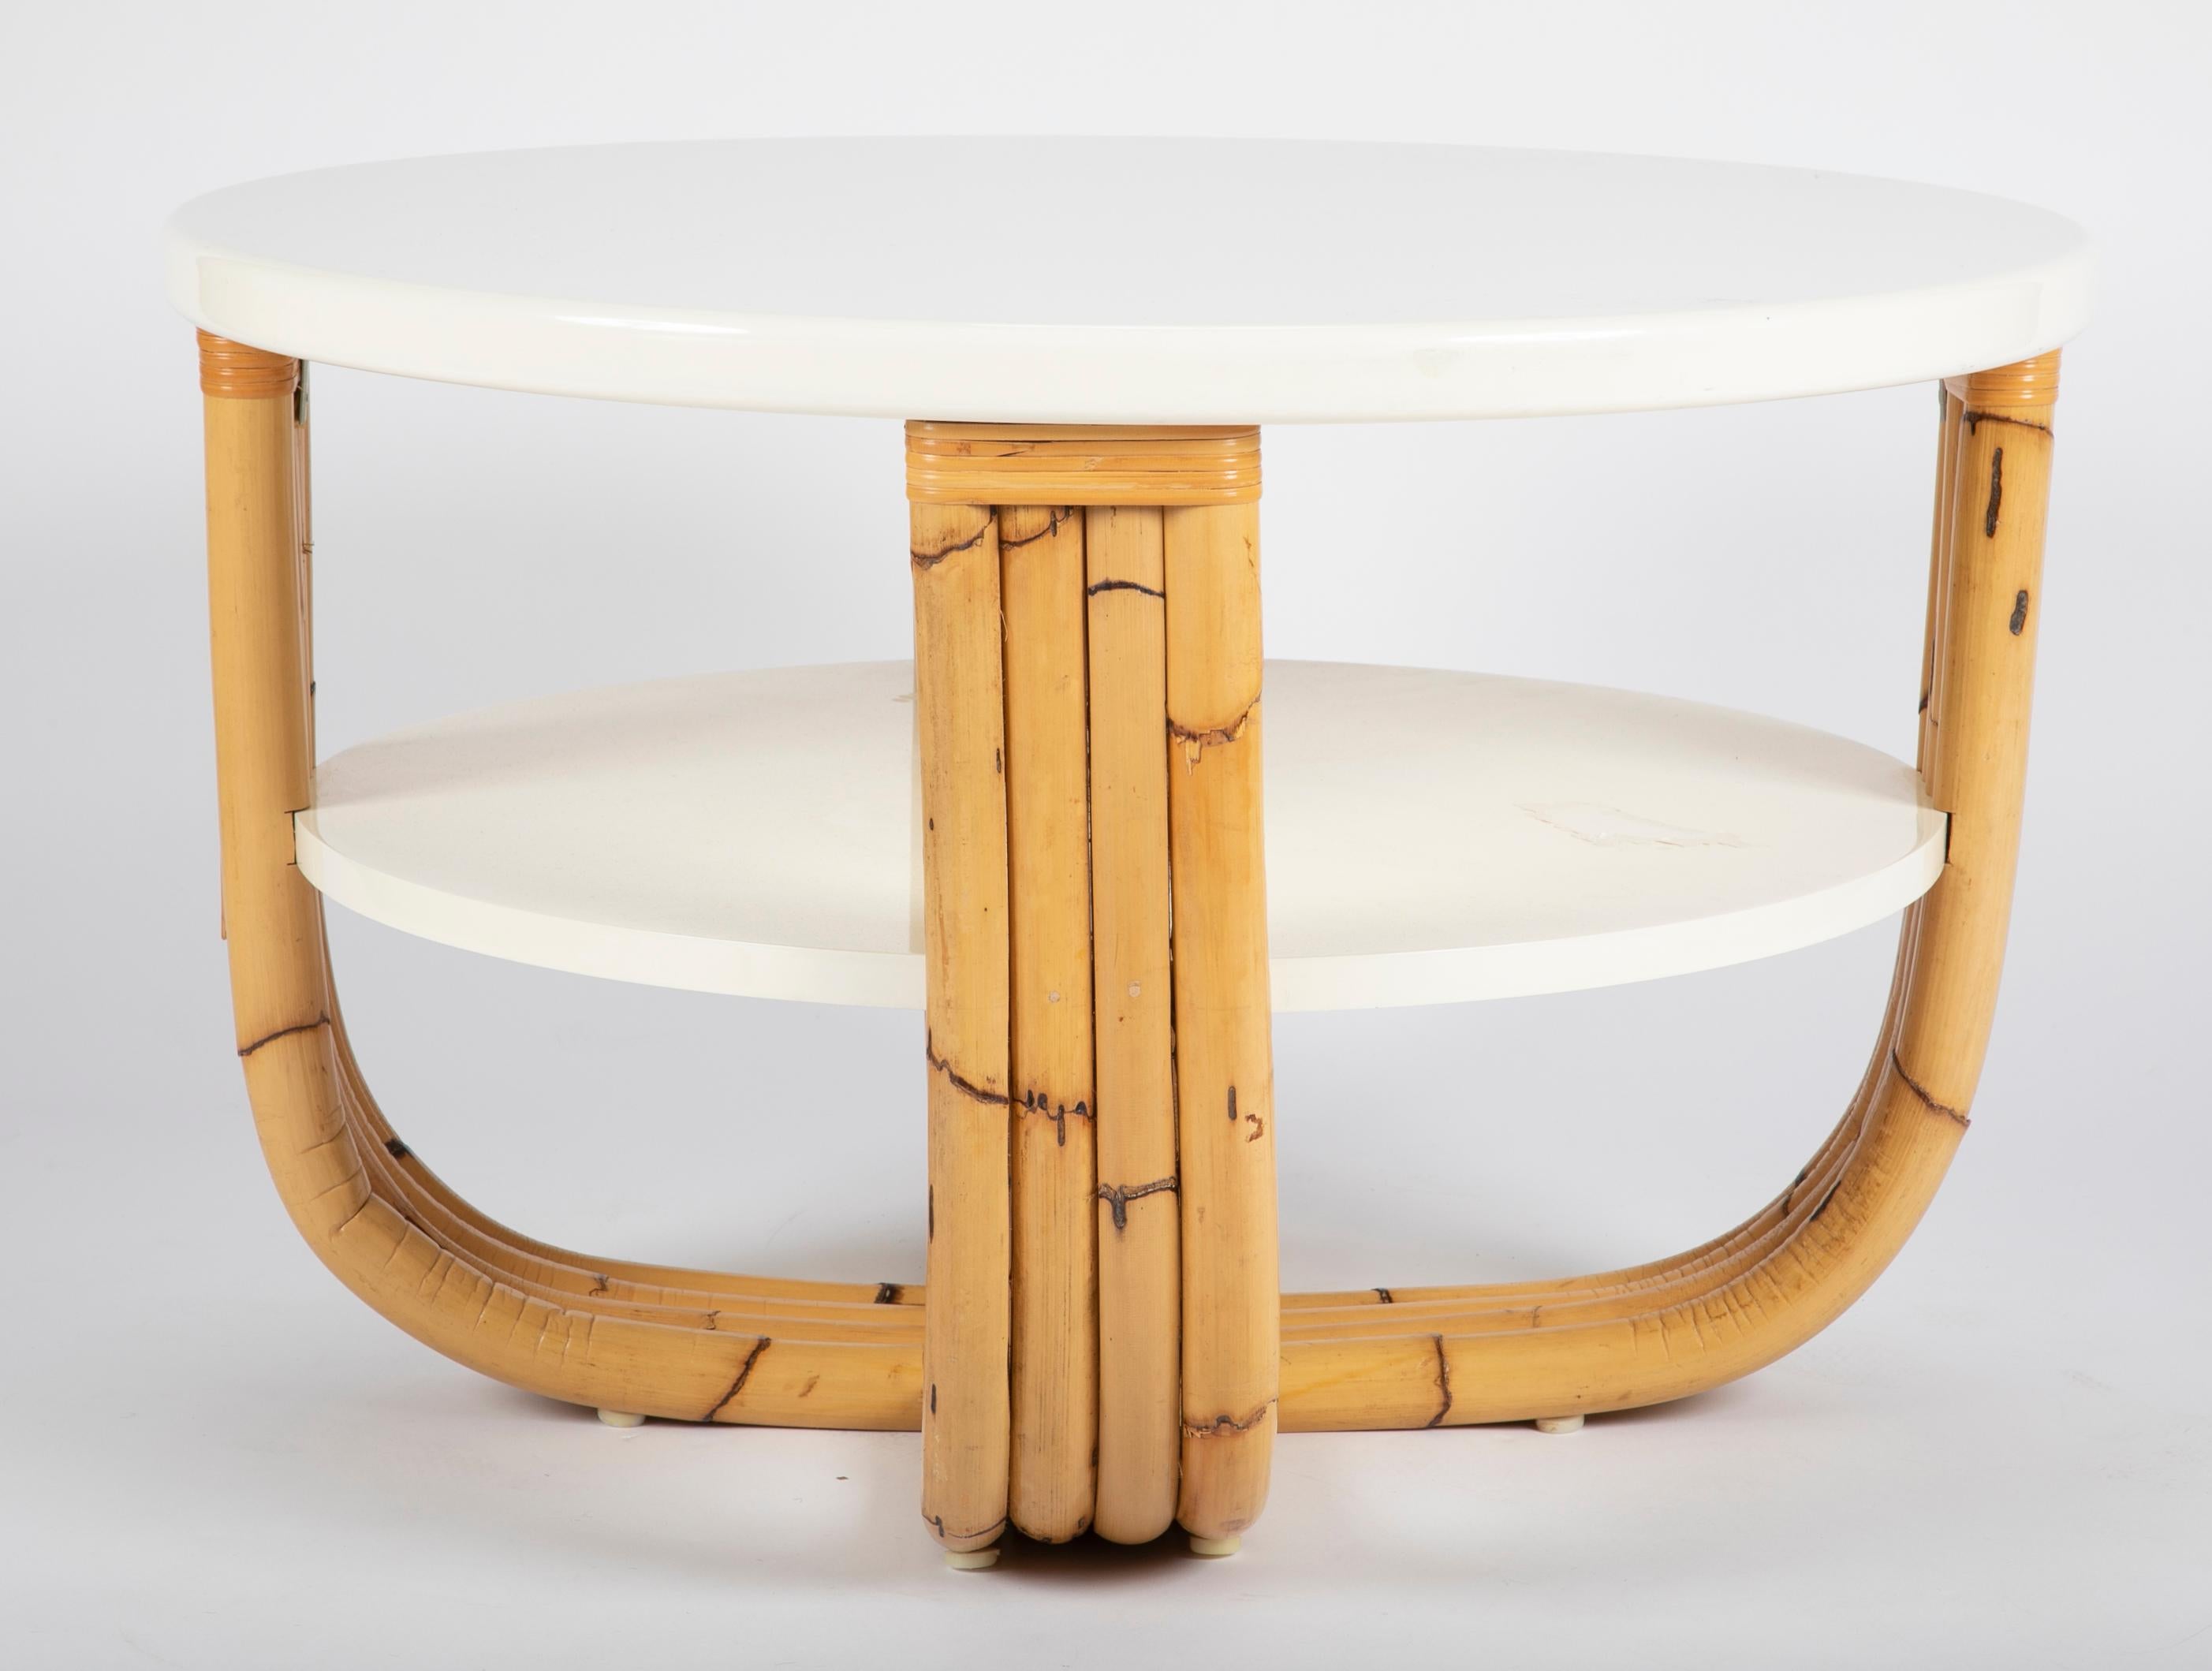 Bamboo Bielecky Brothers Rattan and Cream Lacquer Cocktail Table For Sale